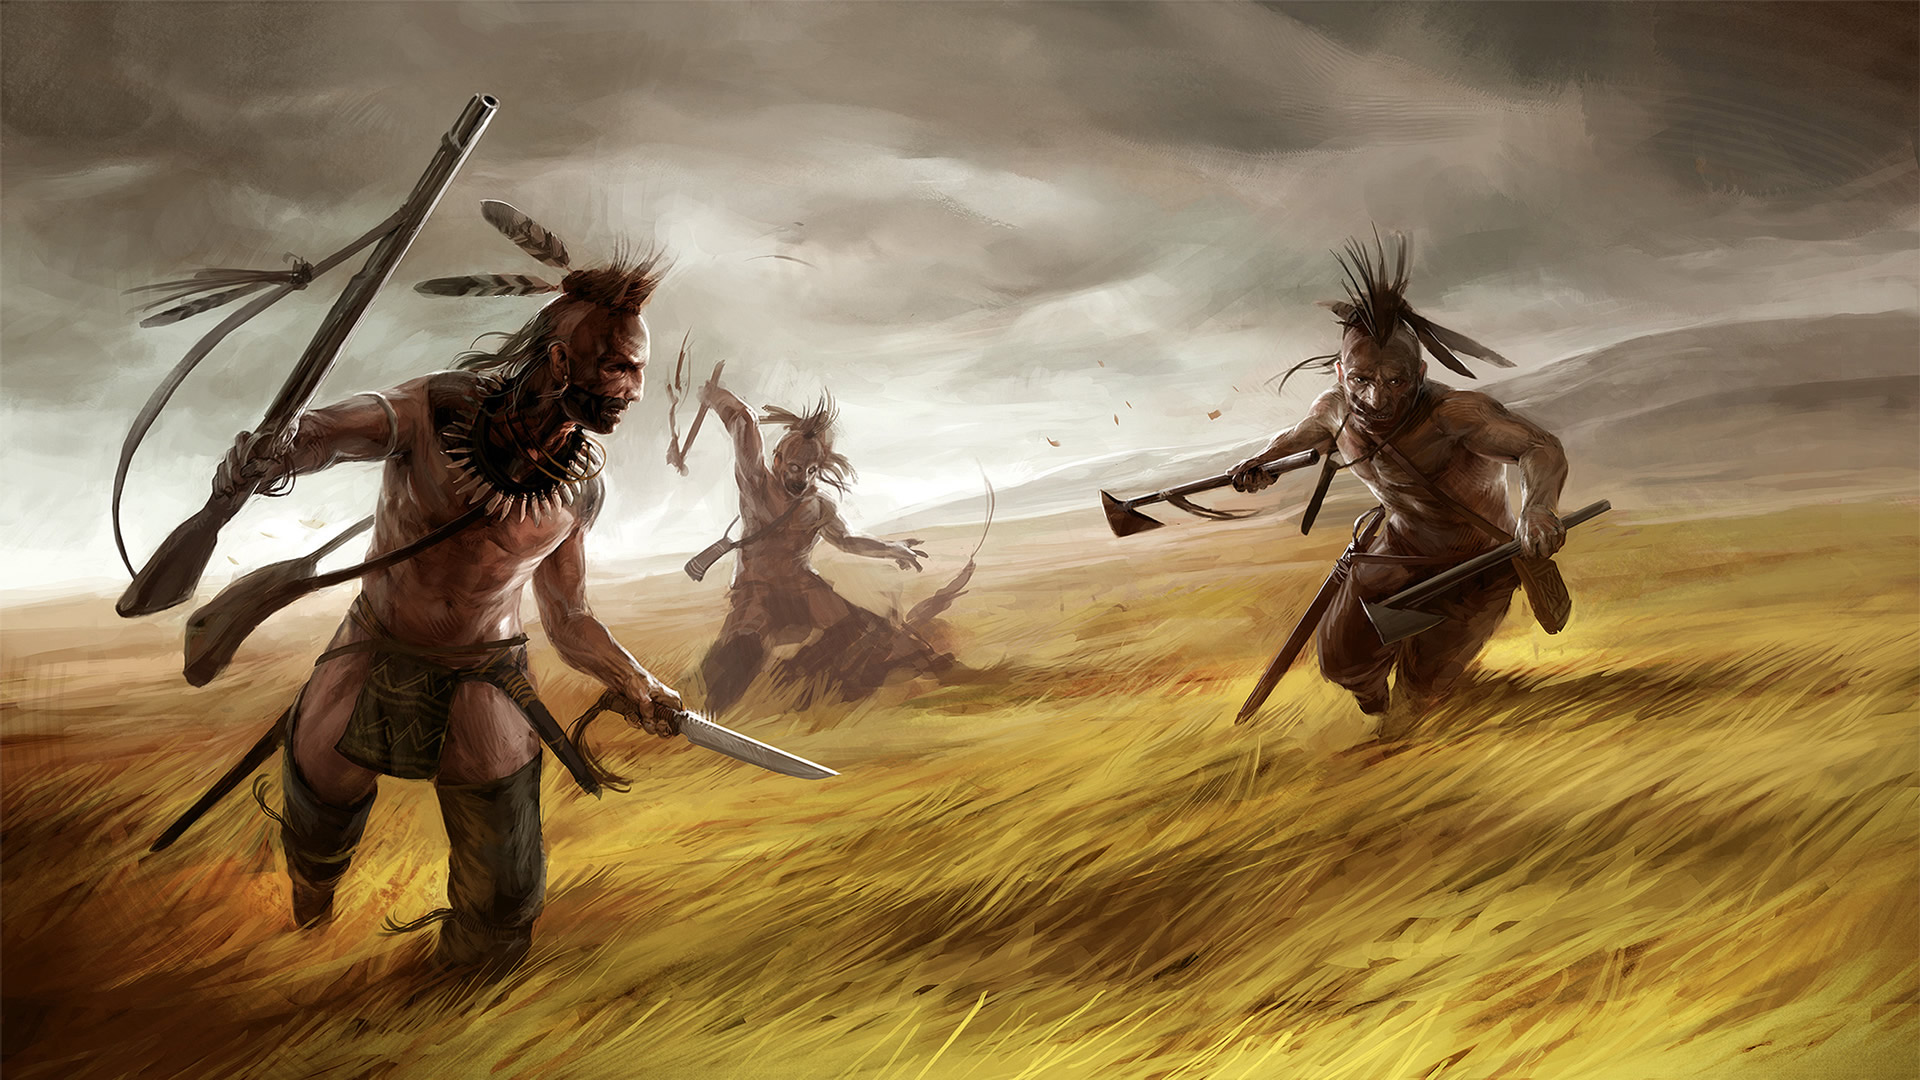 Warpath Campaign Indians On The Prairie War Games Wallpaper Image